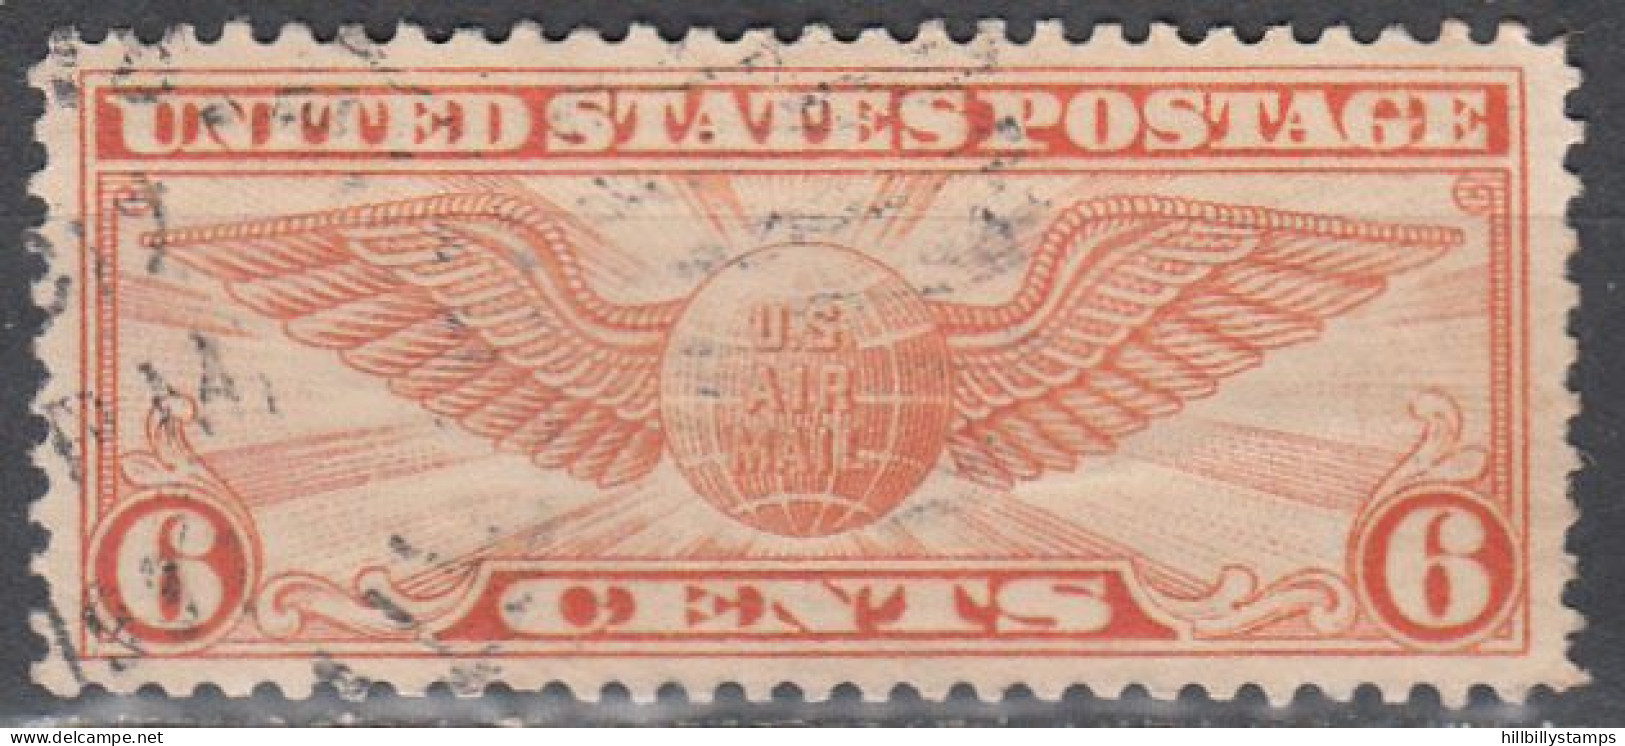 UNITED STATES   SCOTT NO  C19   USED    YEAR 1934 - 1a. 1918-1940 Afgestempeld